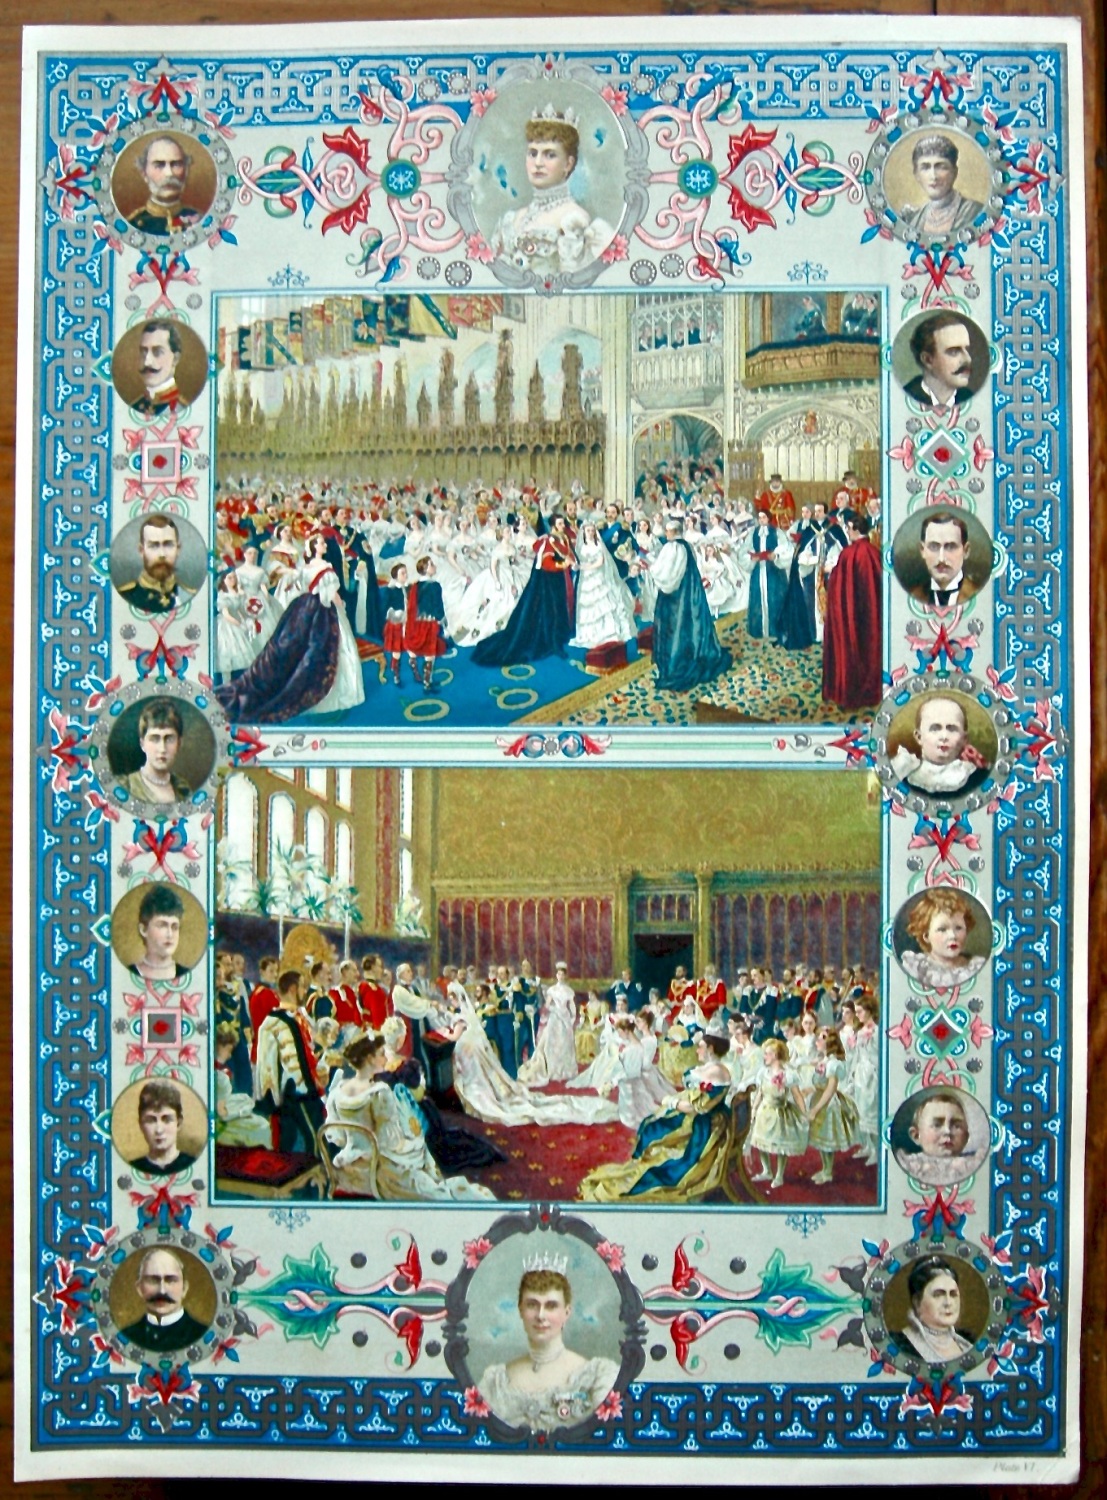 Diamond Jubilee for Queen Victoria.  (Chromo-Lithographic Plate) 1897.